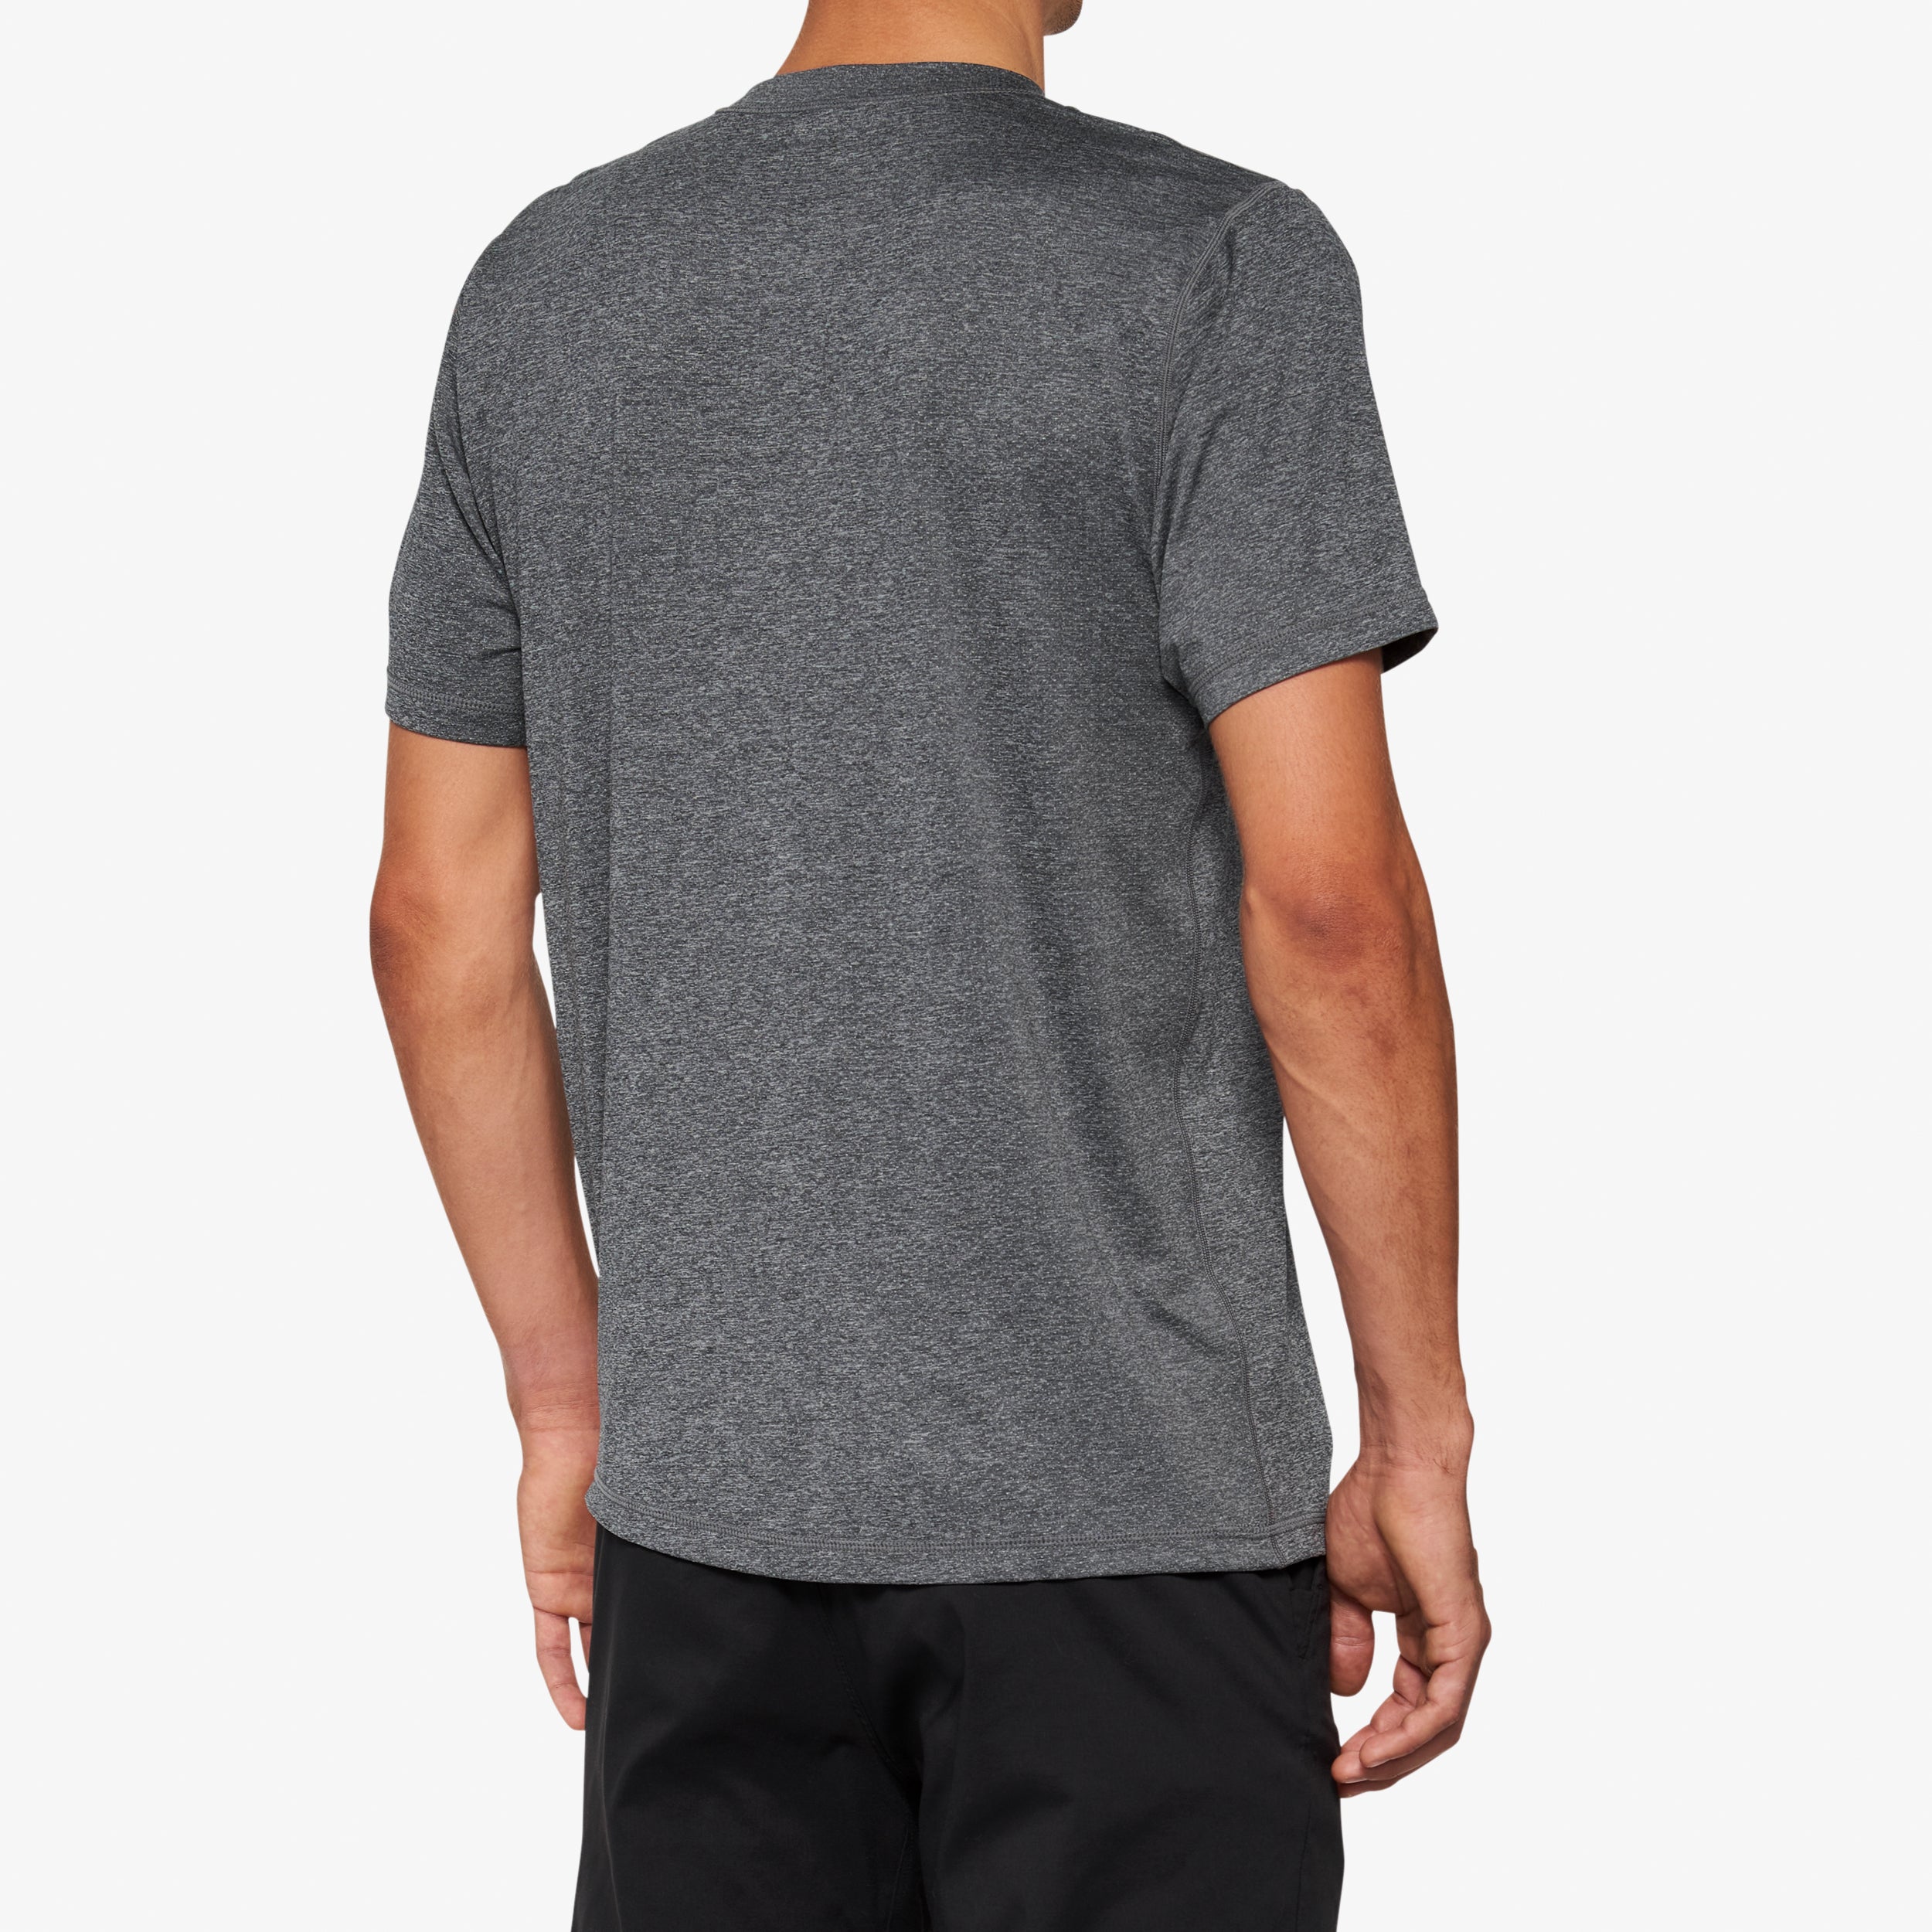 MISSION Athletic Short Sleeve Tee Heather Charcoal - Secondary